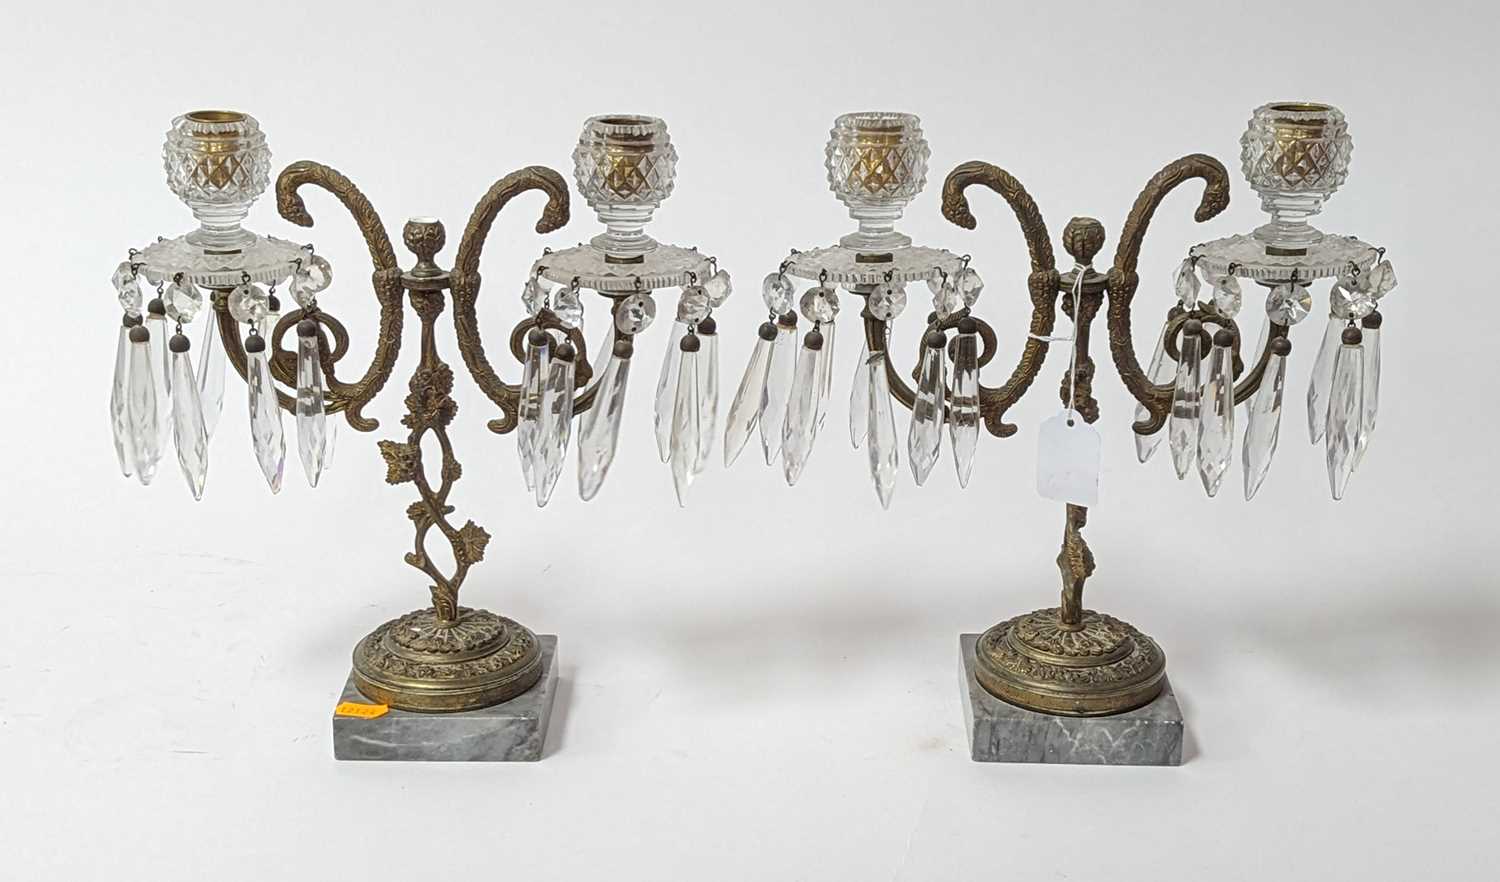 A pair of brass and cut glass table candlesticks, each in the form of fruiting vines upon a polished